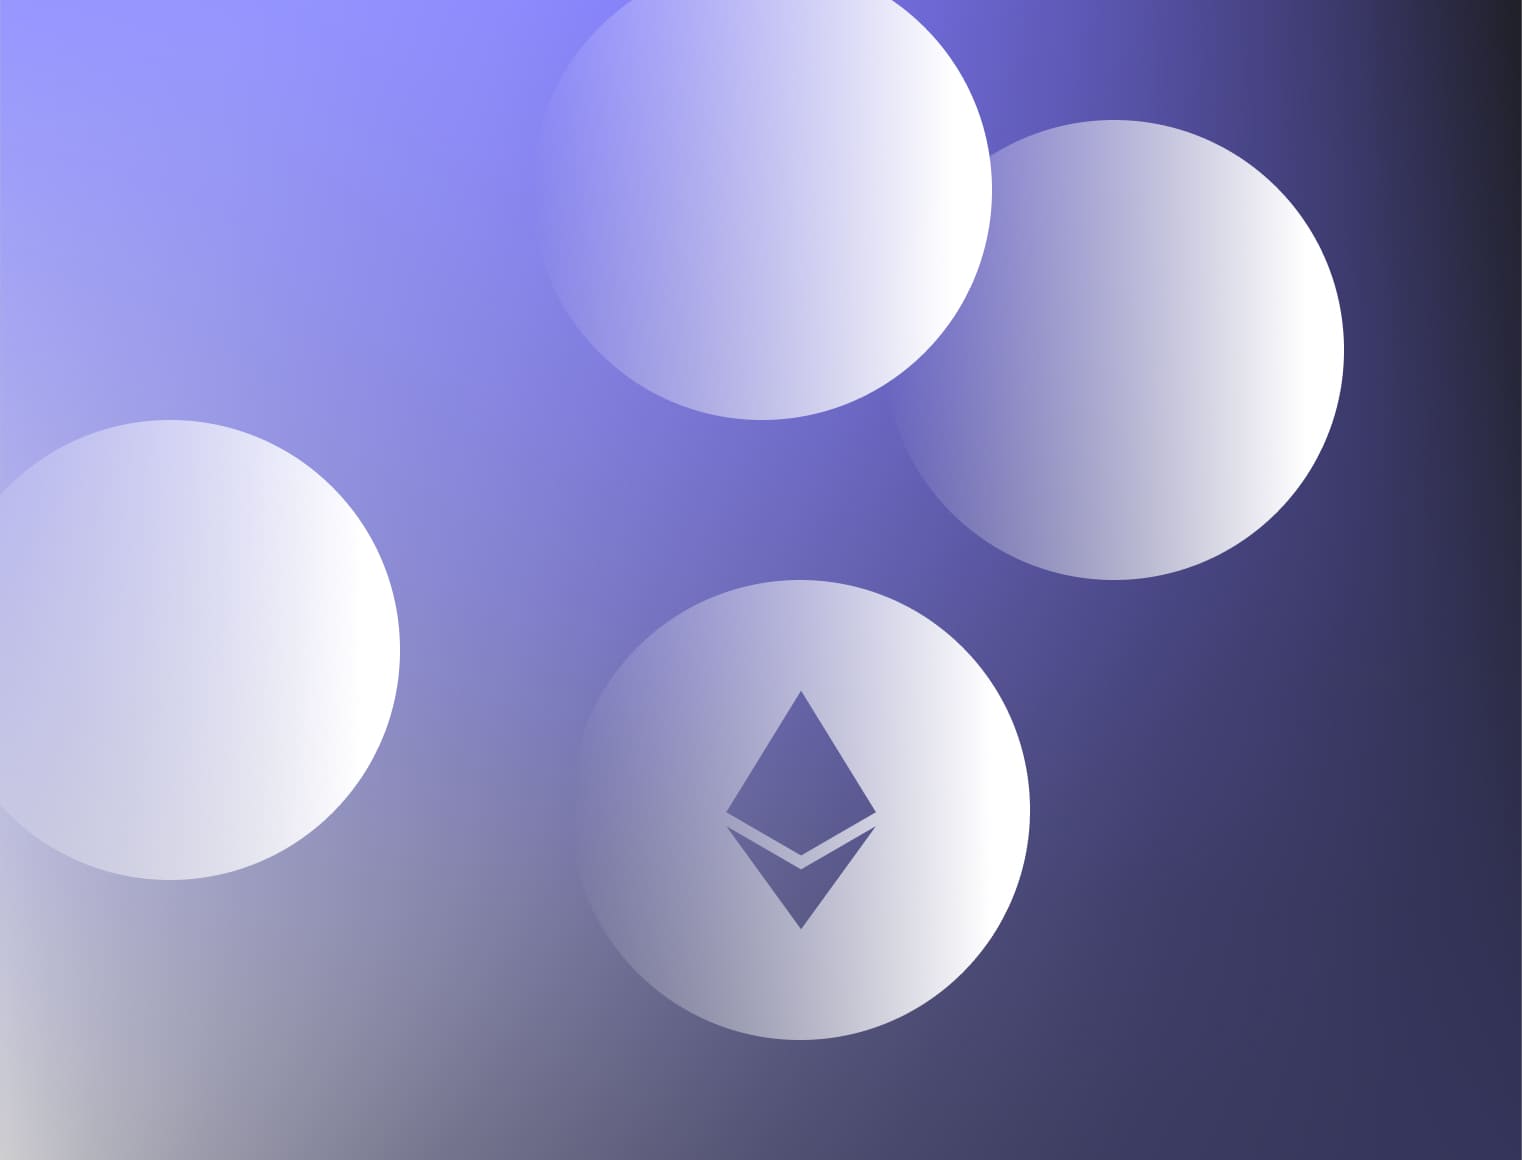 Ethereum Merge: Il Passaggio a Proof of Stake | ETC Group Research